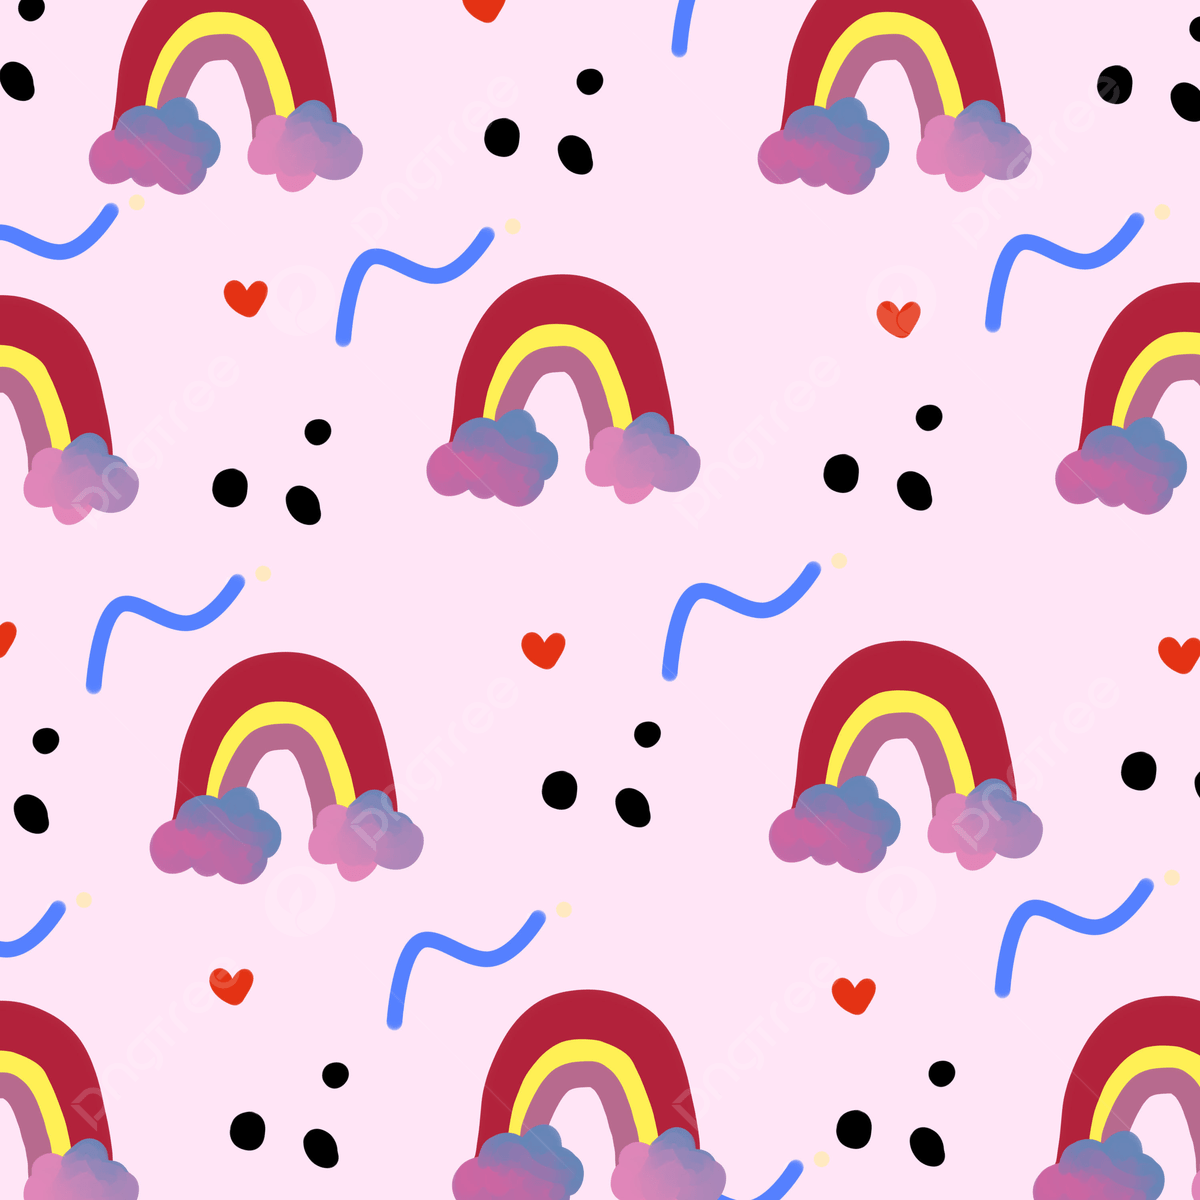 A pattern of rainbows and hearts on pink background - Rainbows